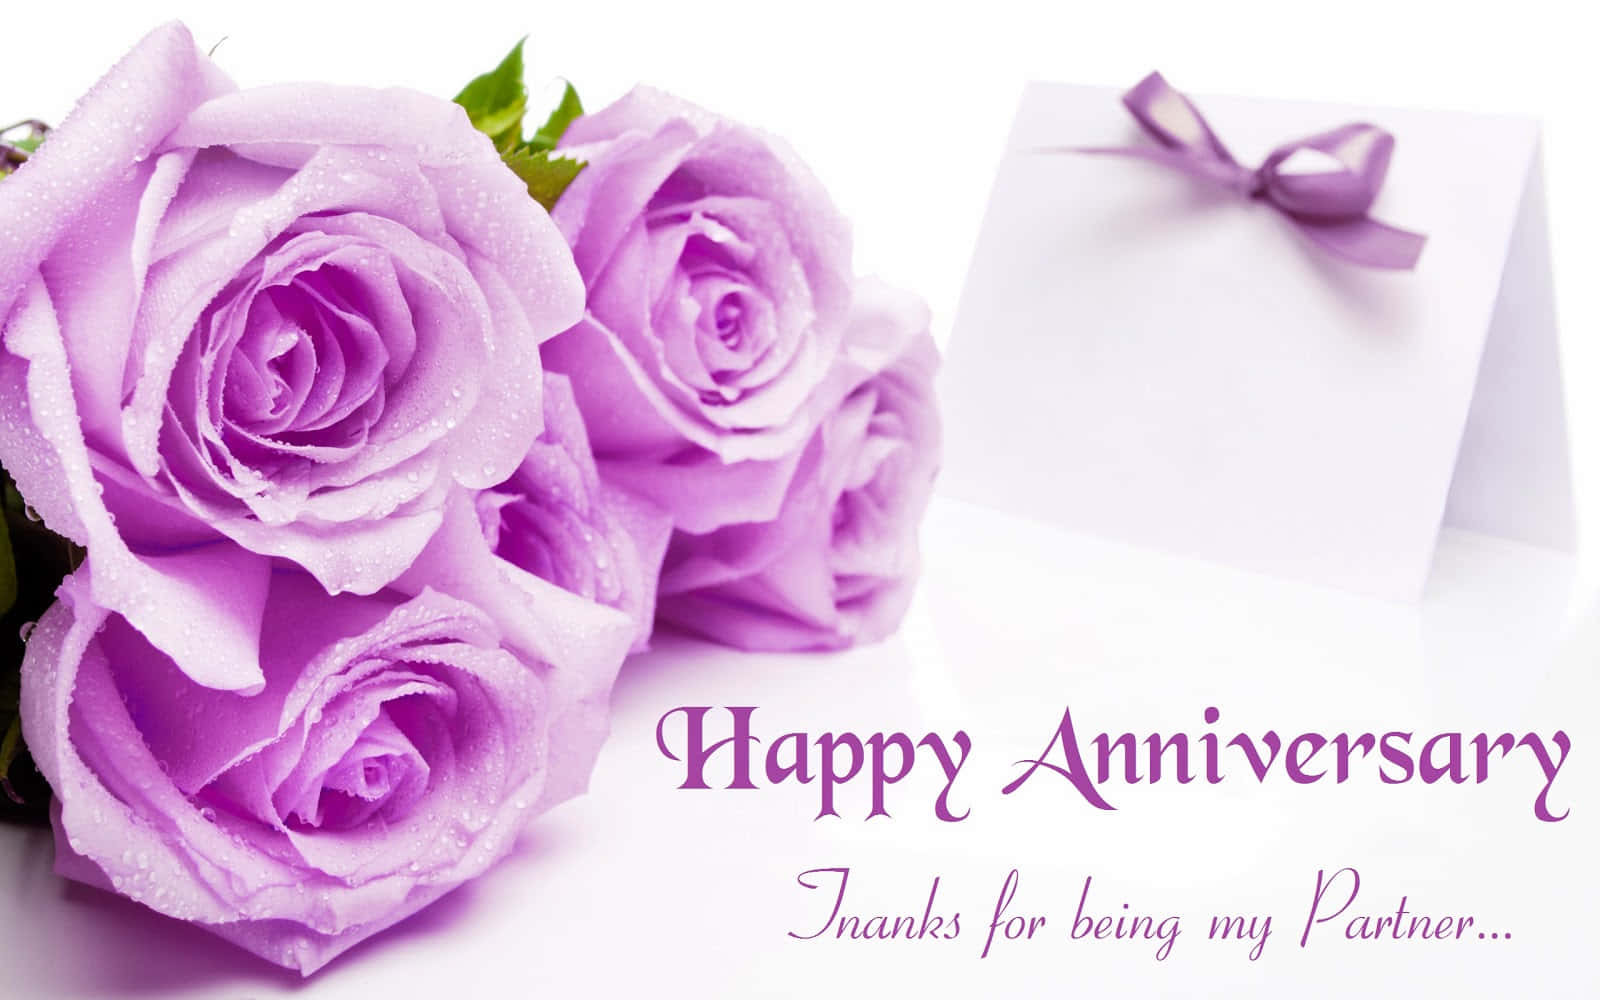 Anniversary With Violet Rose Flowers Wallpaper